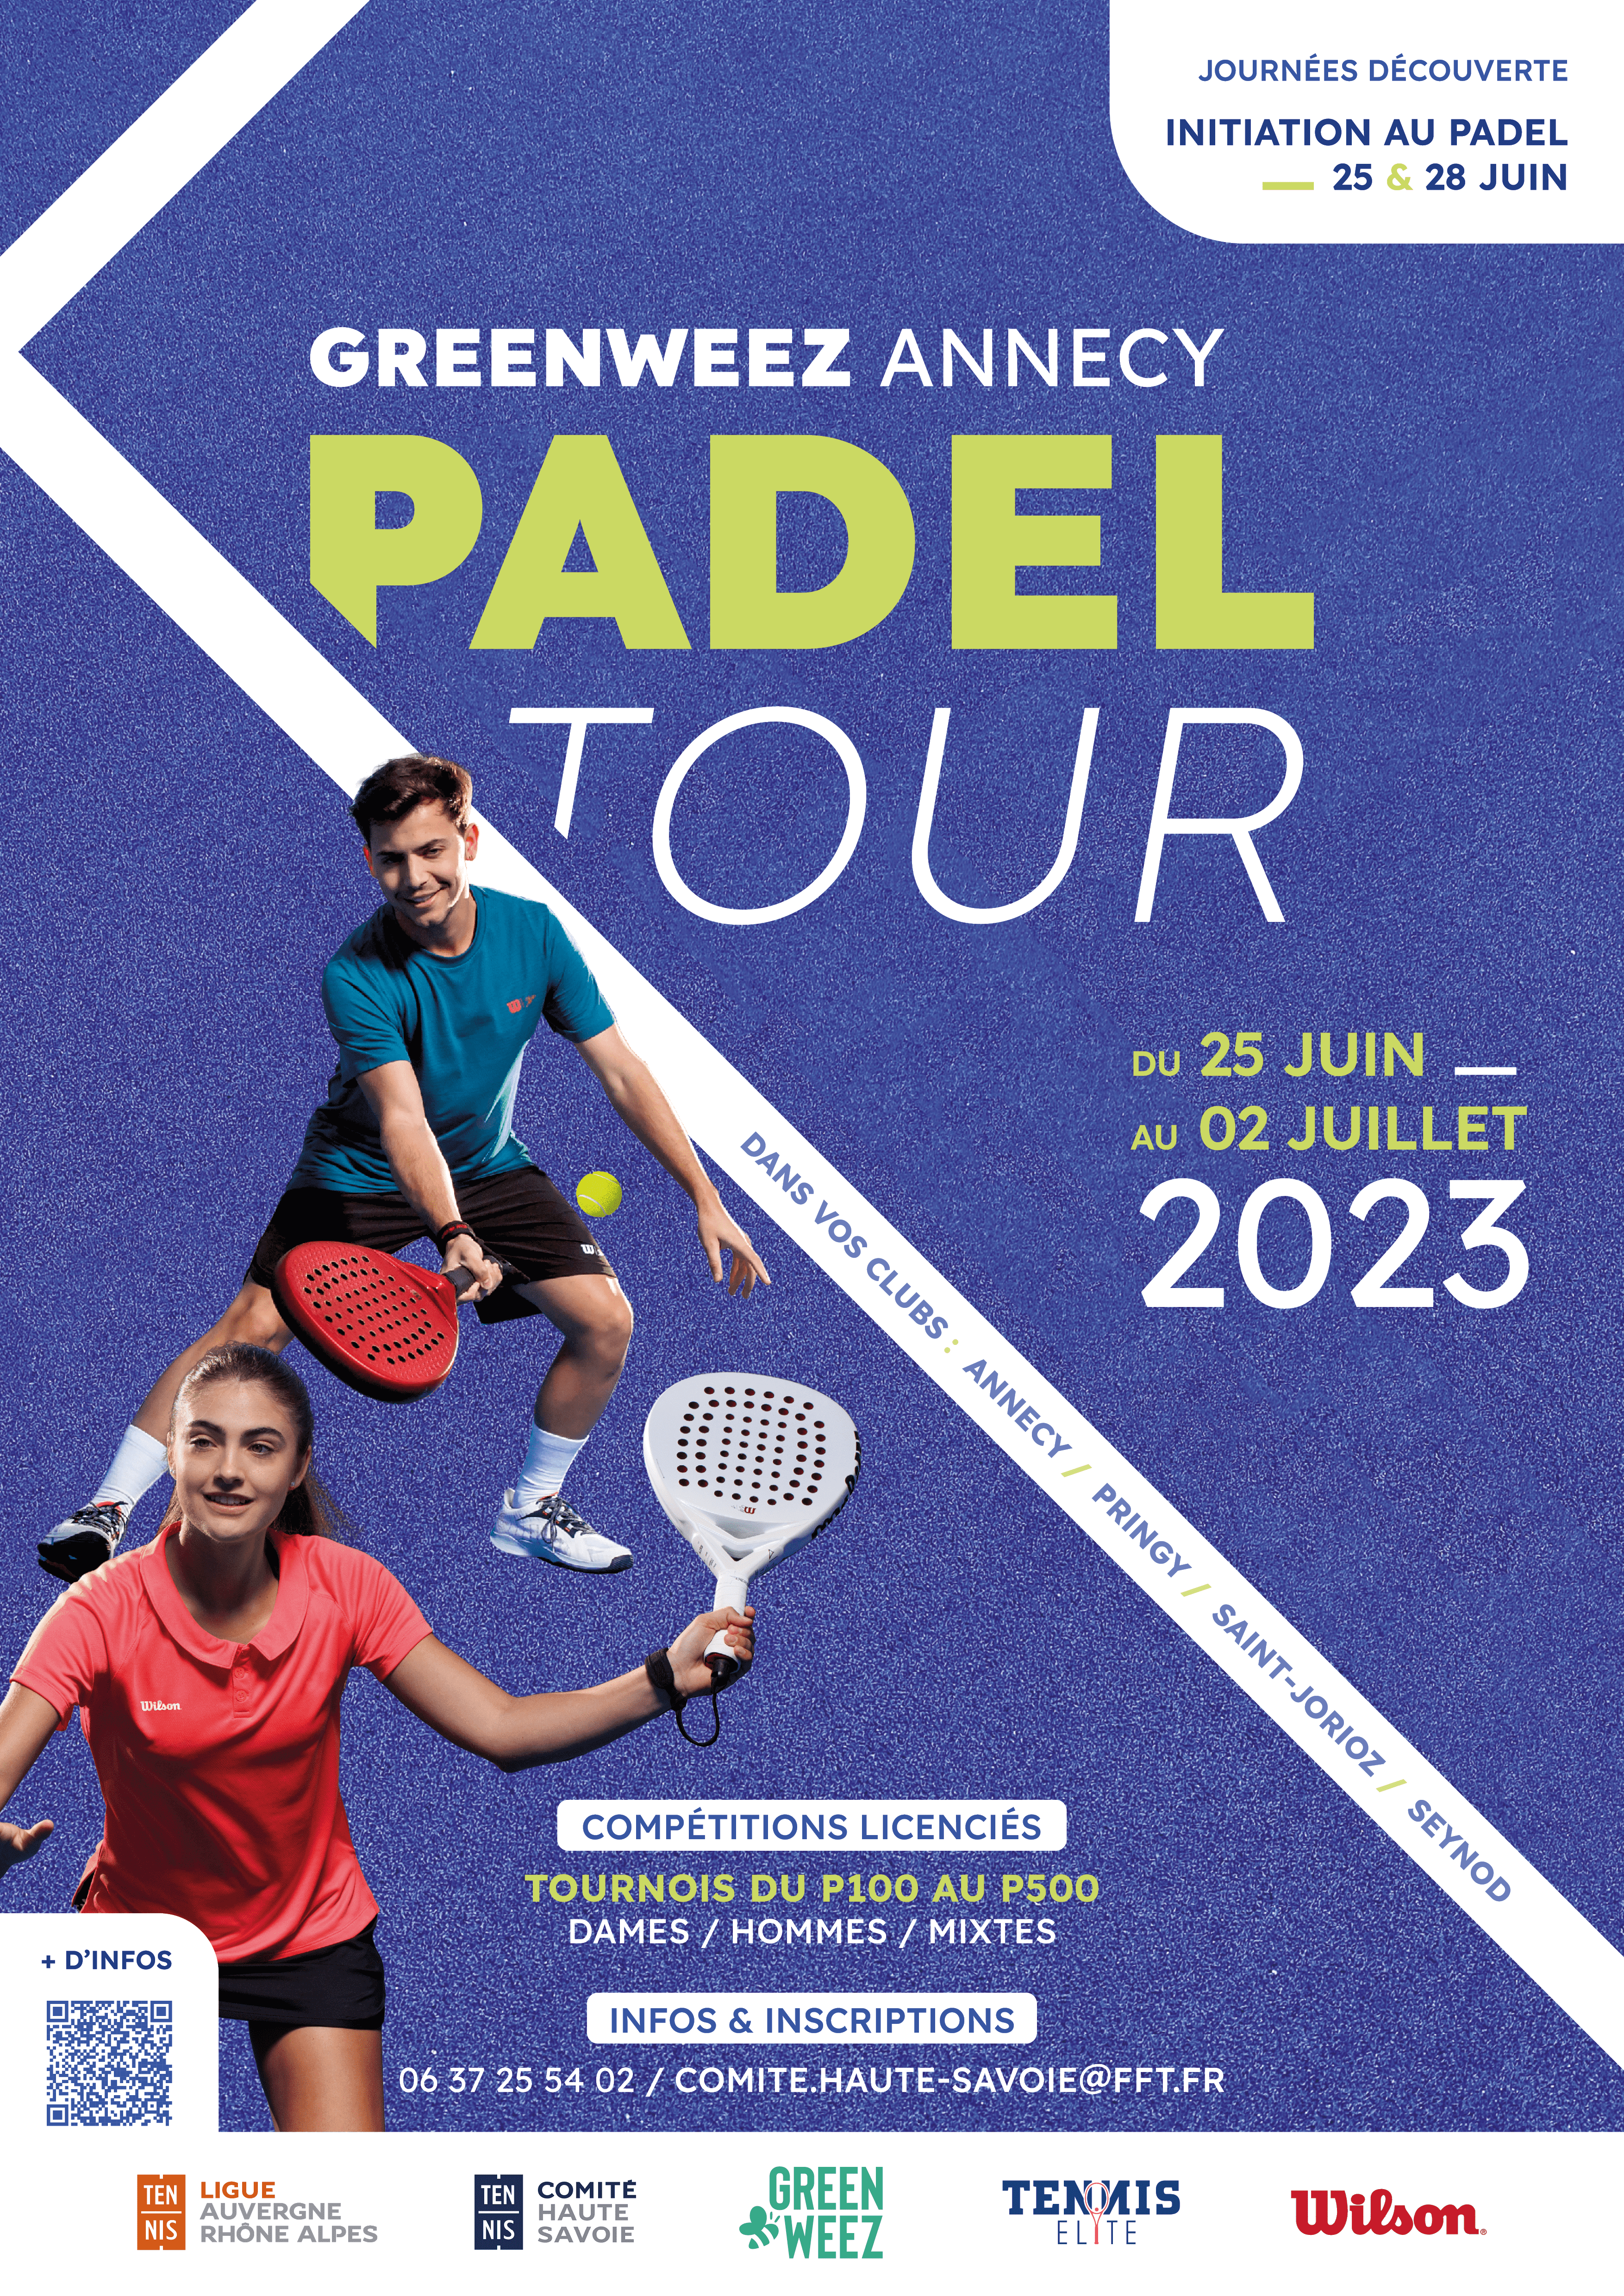 Greenweez Annecy Padel 2023 Tour